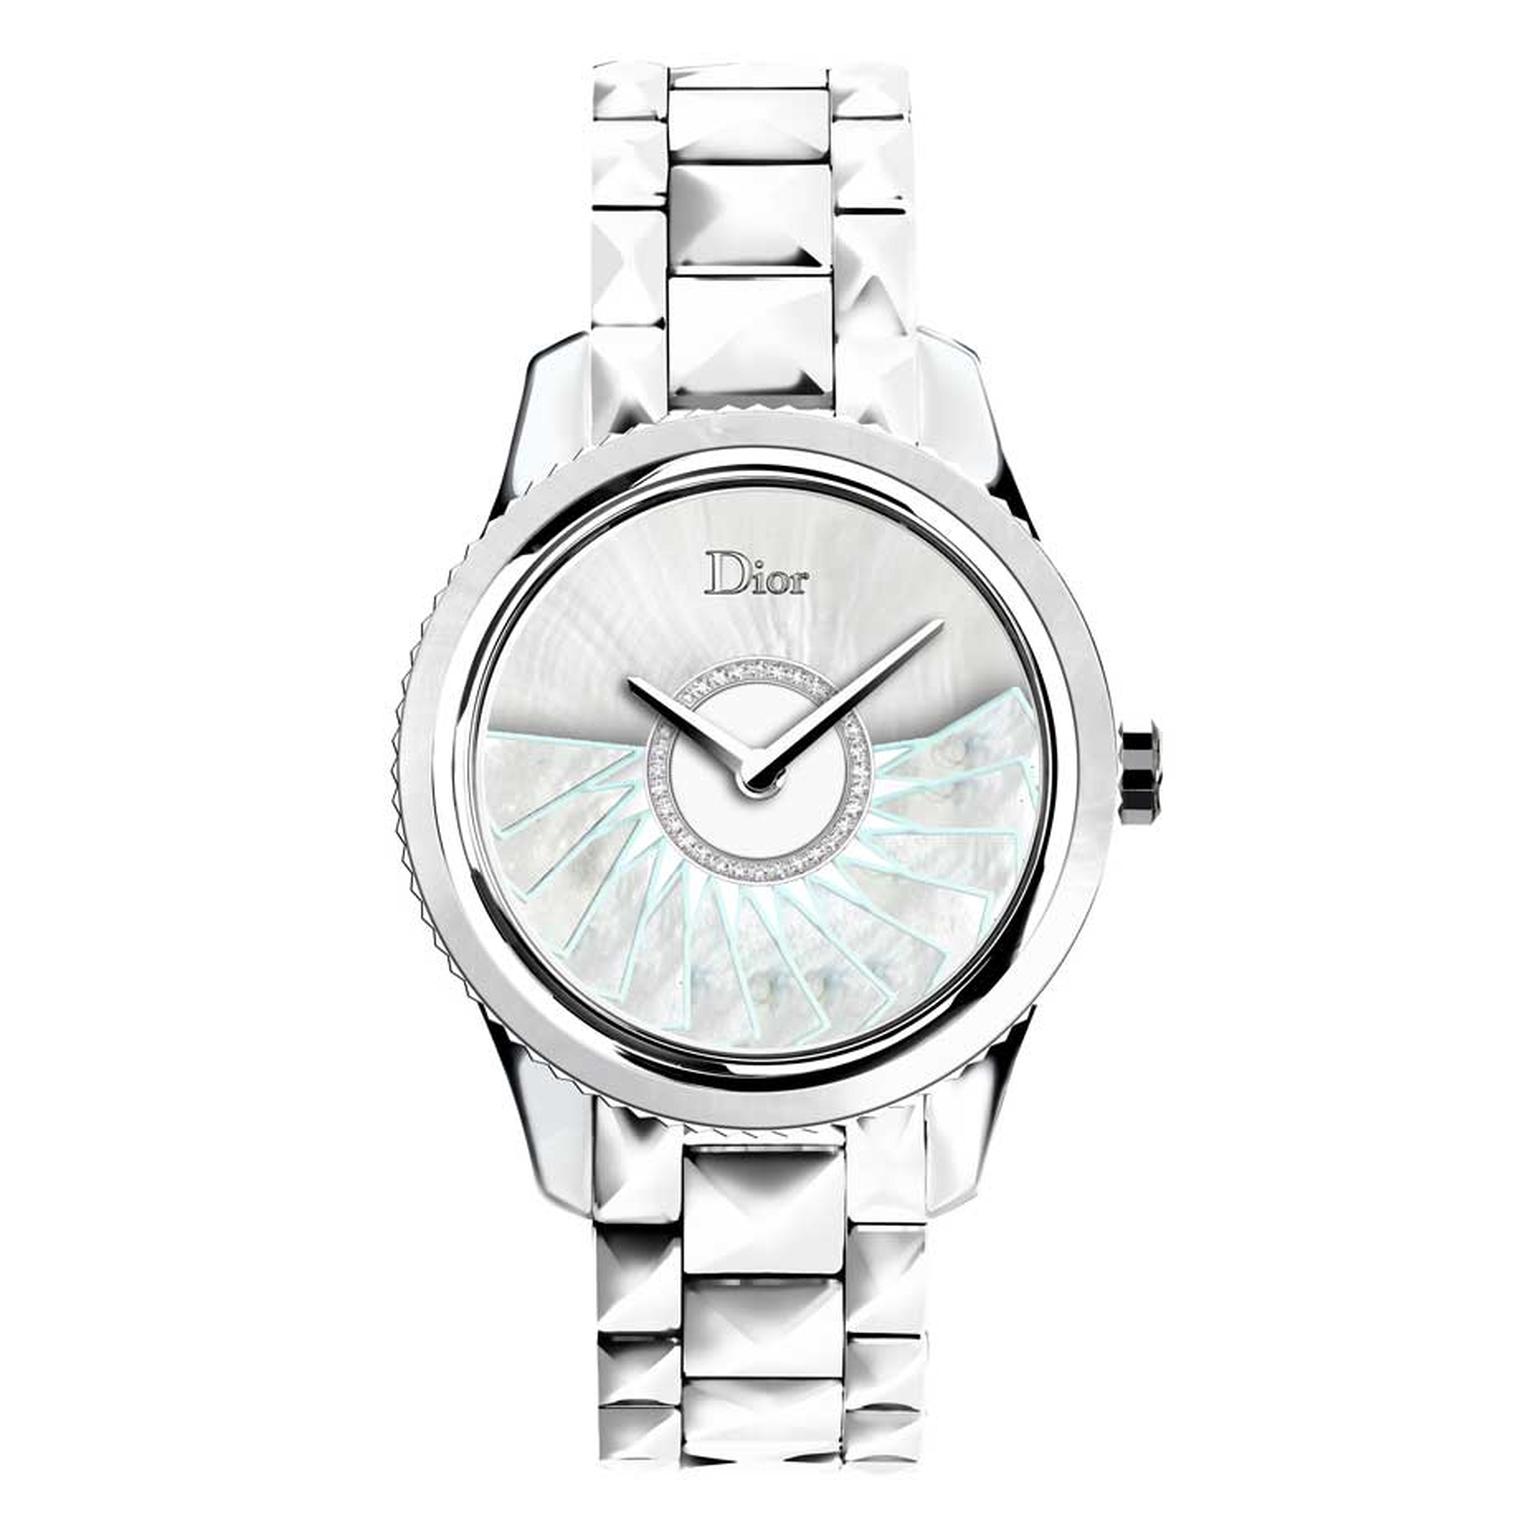 The Dior VIII Grand Bal Plissé Soleil watch in pale blue is available in a limited edition of 188 pieces. The oscillating weight mirrors the 'sweep' of a classic Dior ball gown.